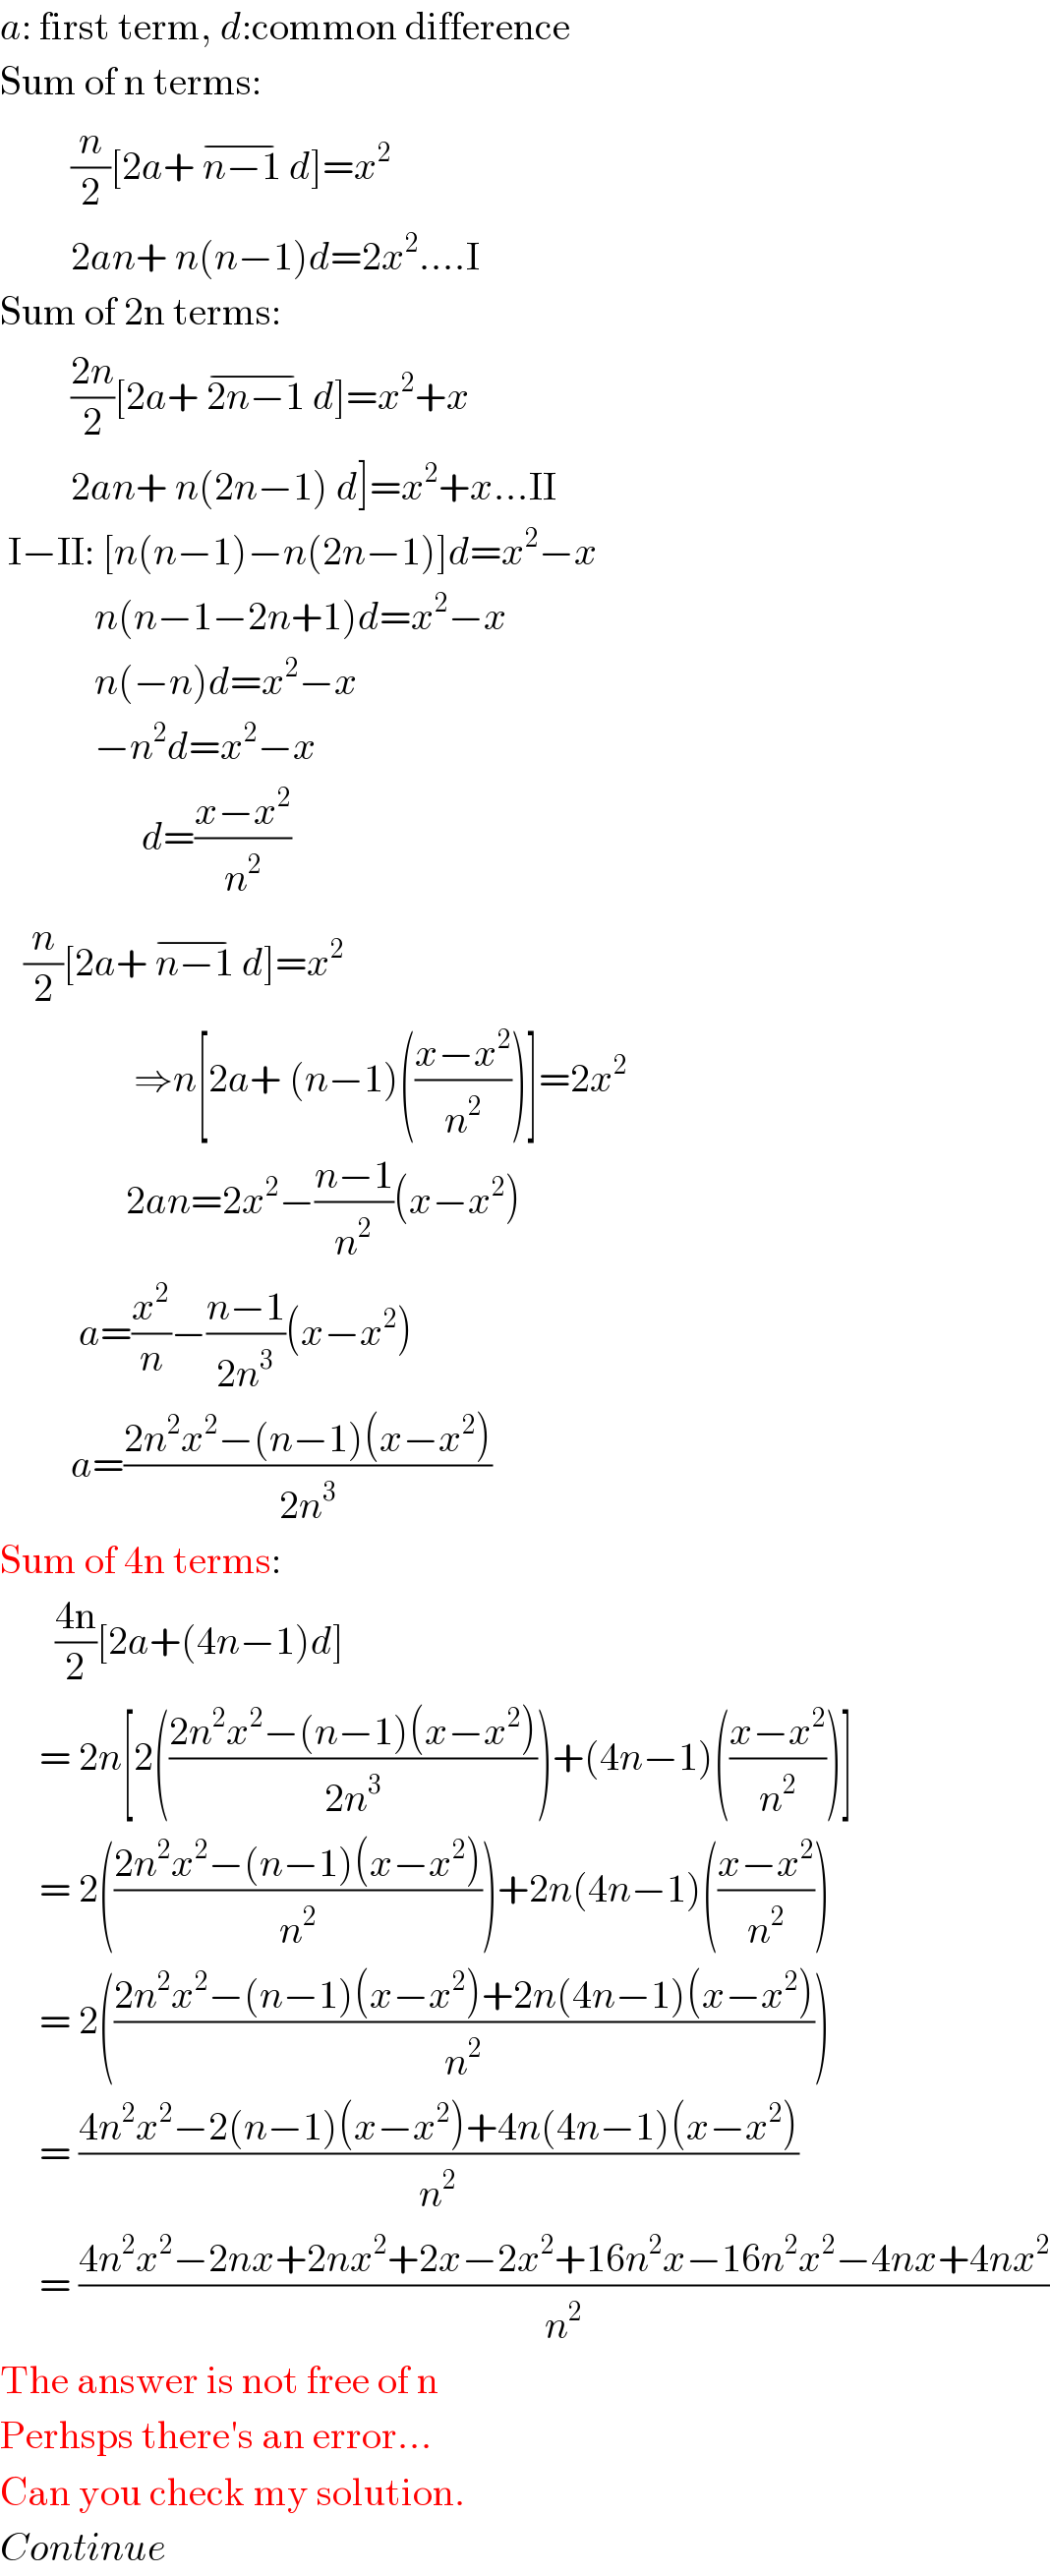 a: first term, d:common difference  Sum of n terms:           (n/2)[2a+ n−1 ^(−) d]=x^2            2an+ n(n−1)d=2x^2 ....I  Sum of 2n terms:           ((2n)/2)[2a+ 2n−1 ^(−) d]=x^2 +x           2an+ n(2n−1) d]=x^2 +x...II   I−II: [n(n−1)−n(2n−1)]d=x^2 −x                     n(n−1−2n+1)d=x^2 −x                     n(−n)d=x^2 −x                     −n^2 d=x^2 −x                           d=((x−x^2 )/n^2 )     (n/2)[2a+ n−1 ^(−) d]=x^2                    ⇒n[2a+ (n−1)(((x−x^2 )/n^2 ))]=2x^2                   2an=2x^2 −((n−1)/n^2 )(x−x^2 )            a=(x^2 /n)−((n−1)/(2n^3 ))(x−x^2 )           a=((2n^2 x^2 −(n−1)(x−x^2 ))/(2n^3 ))  Sum of 4n terms:         ((4n)/2)[2a+(4n−1)d]       = 2n[2(((2n^2 x^2 −(n−1)(x−x^2 ))/(2n^3 )))+(4n−1)(((x−x^2 )/n^2 ))]       = 2(((2n^2 x^2 −(n−1)(x−x^2 ))/n^2 ))+2n(4n−1)(((x−x^2 )/n^2 ))       = 2(((2n^2 x^2 −(n−1)(x−x^2 )+2n(4n−1)(x−x^2 ))/n^2 ))       = ((4n^2 x^2 −2(n−1)(x−x^2 )+4n(4n−1)(x−x^2 ))/n^2 )       = ((4n^2 x^2 −2nx+2nx^2 +2x−2x^2 +16n^2 x−16n^2 x^2 −4nx+4nx^2 )/n^2 )  The answer is not free of n  Perhsps there′s an error...  Can you check my solution.  Continue  